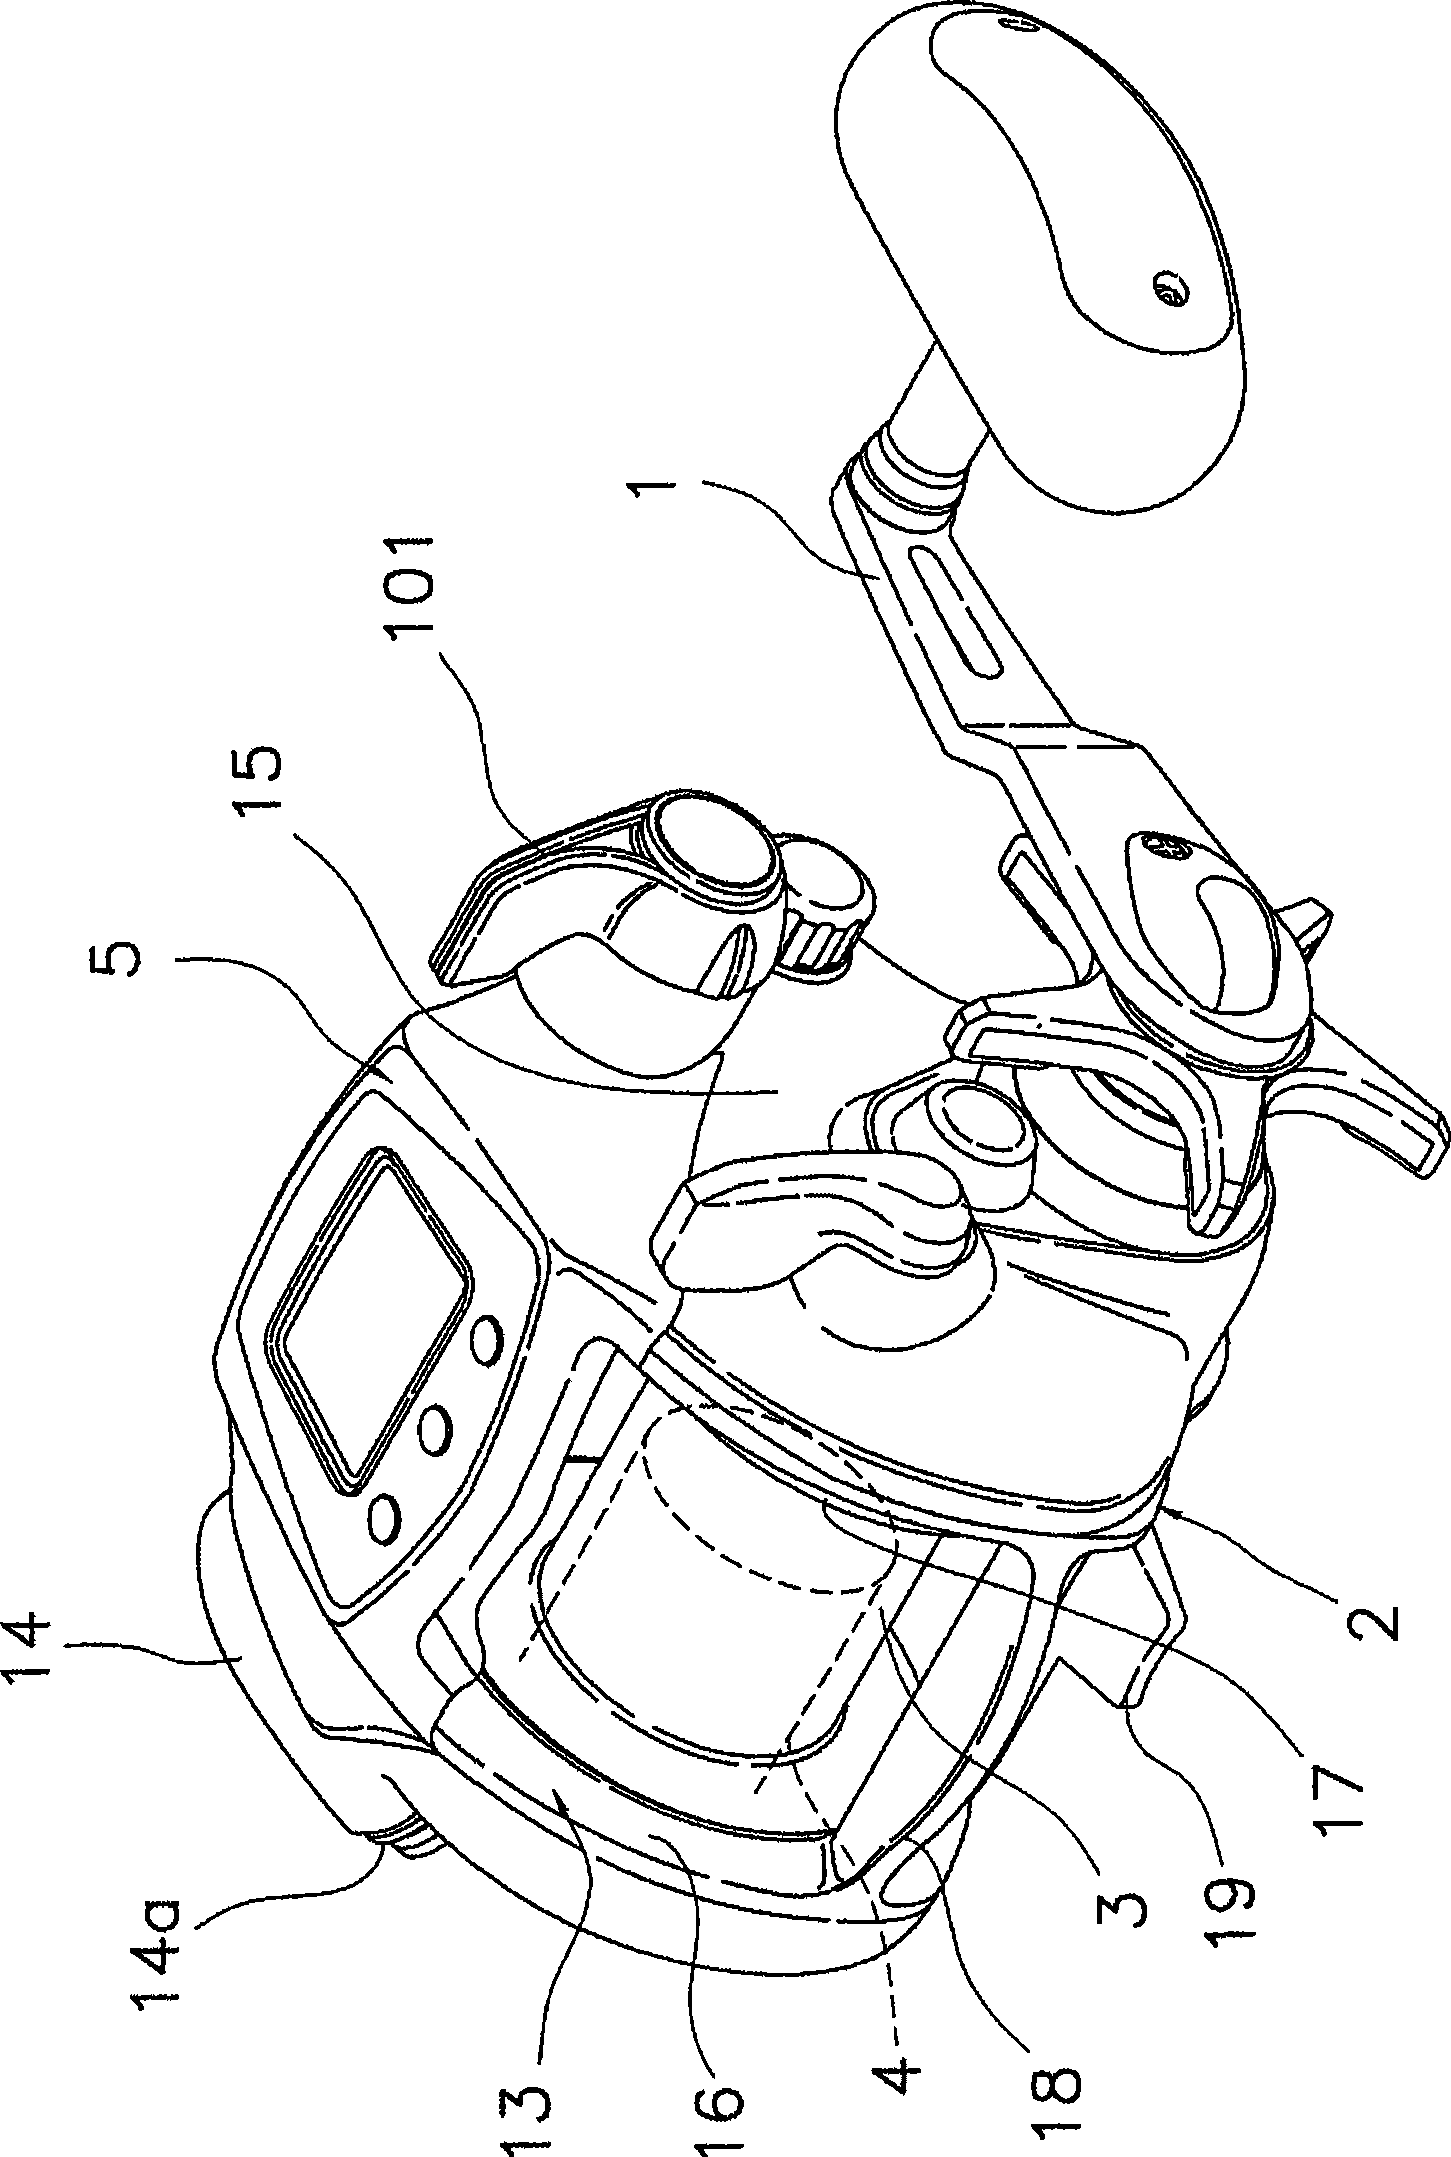 Motor control device of electric fishing reel